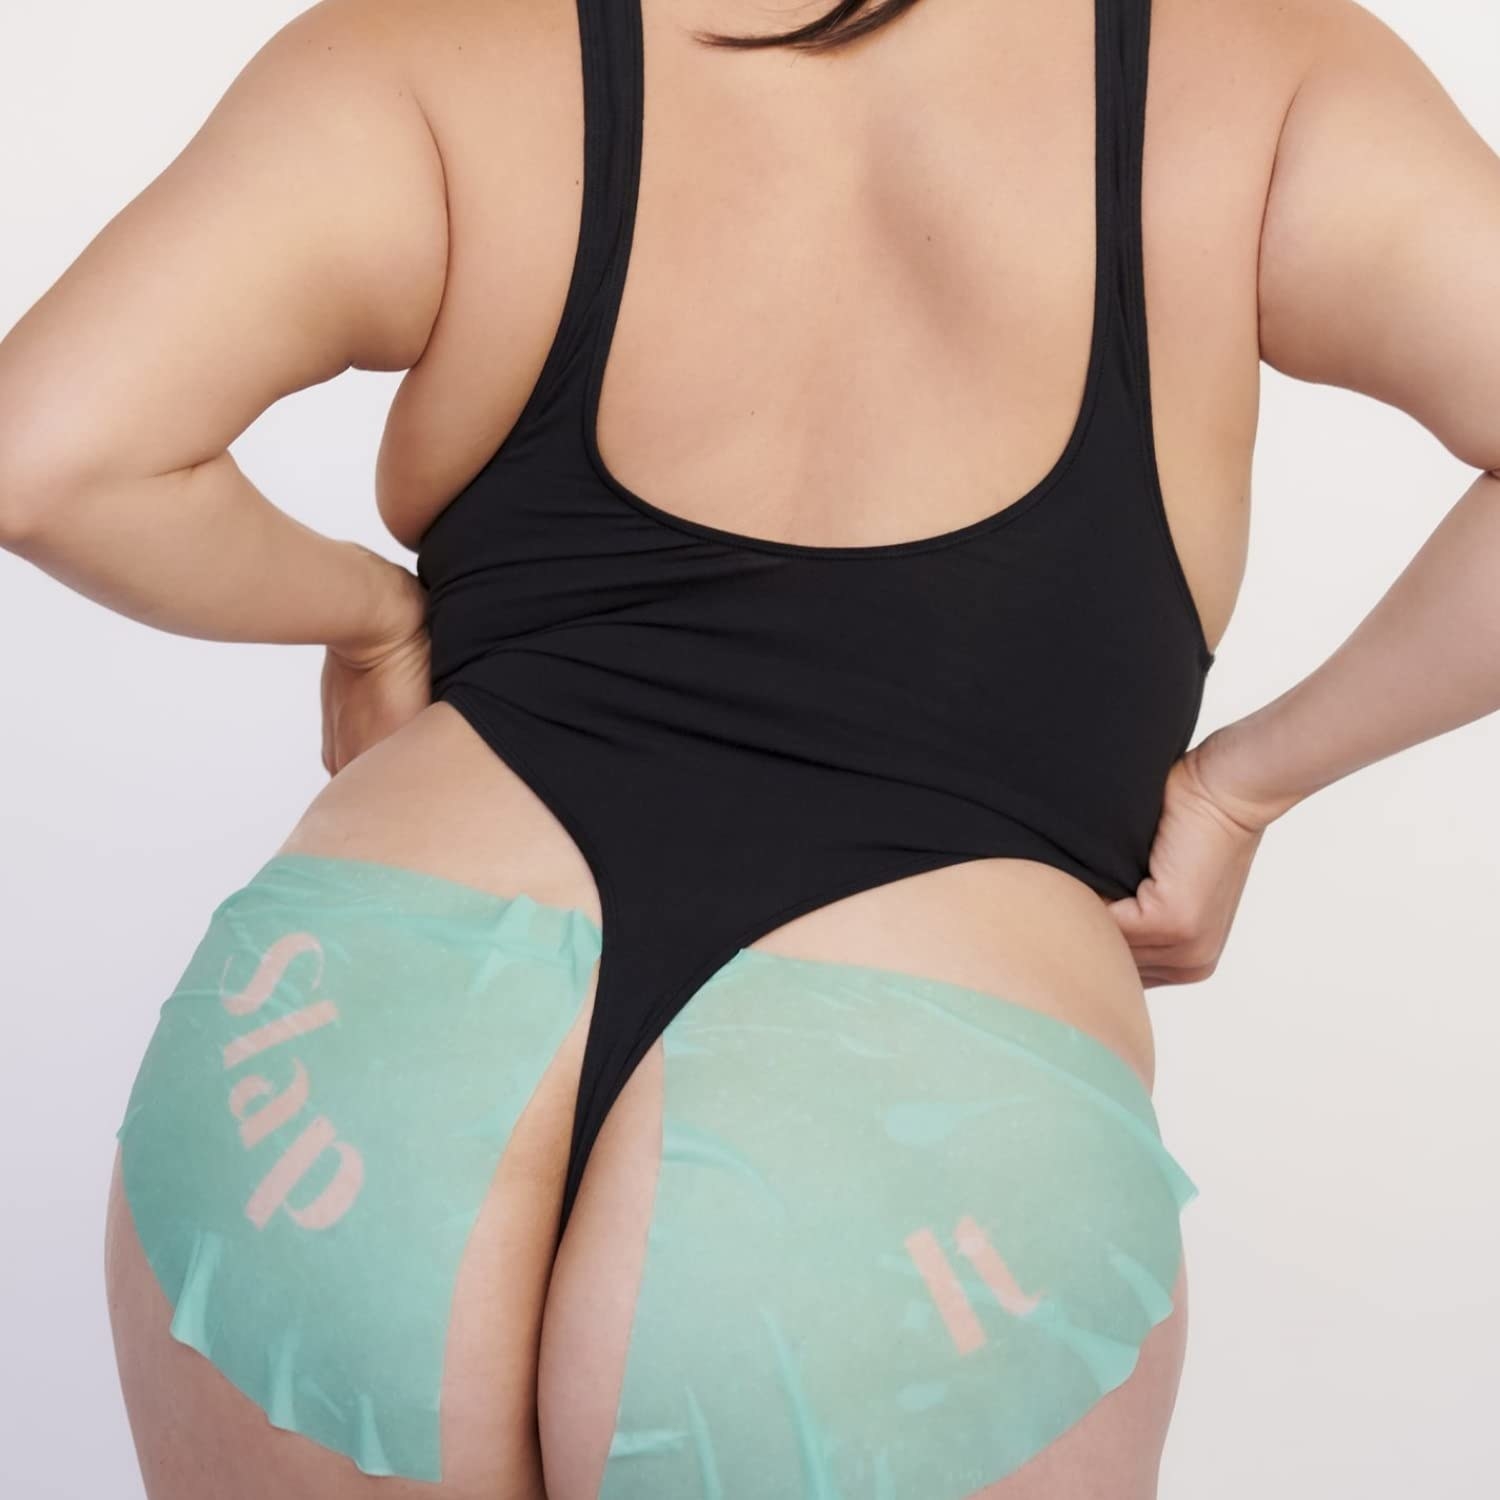 model wearing the mask on their butt that reads slap on one cheek and it on the other cheek